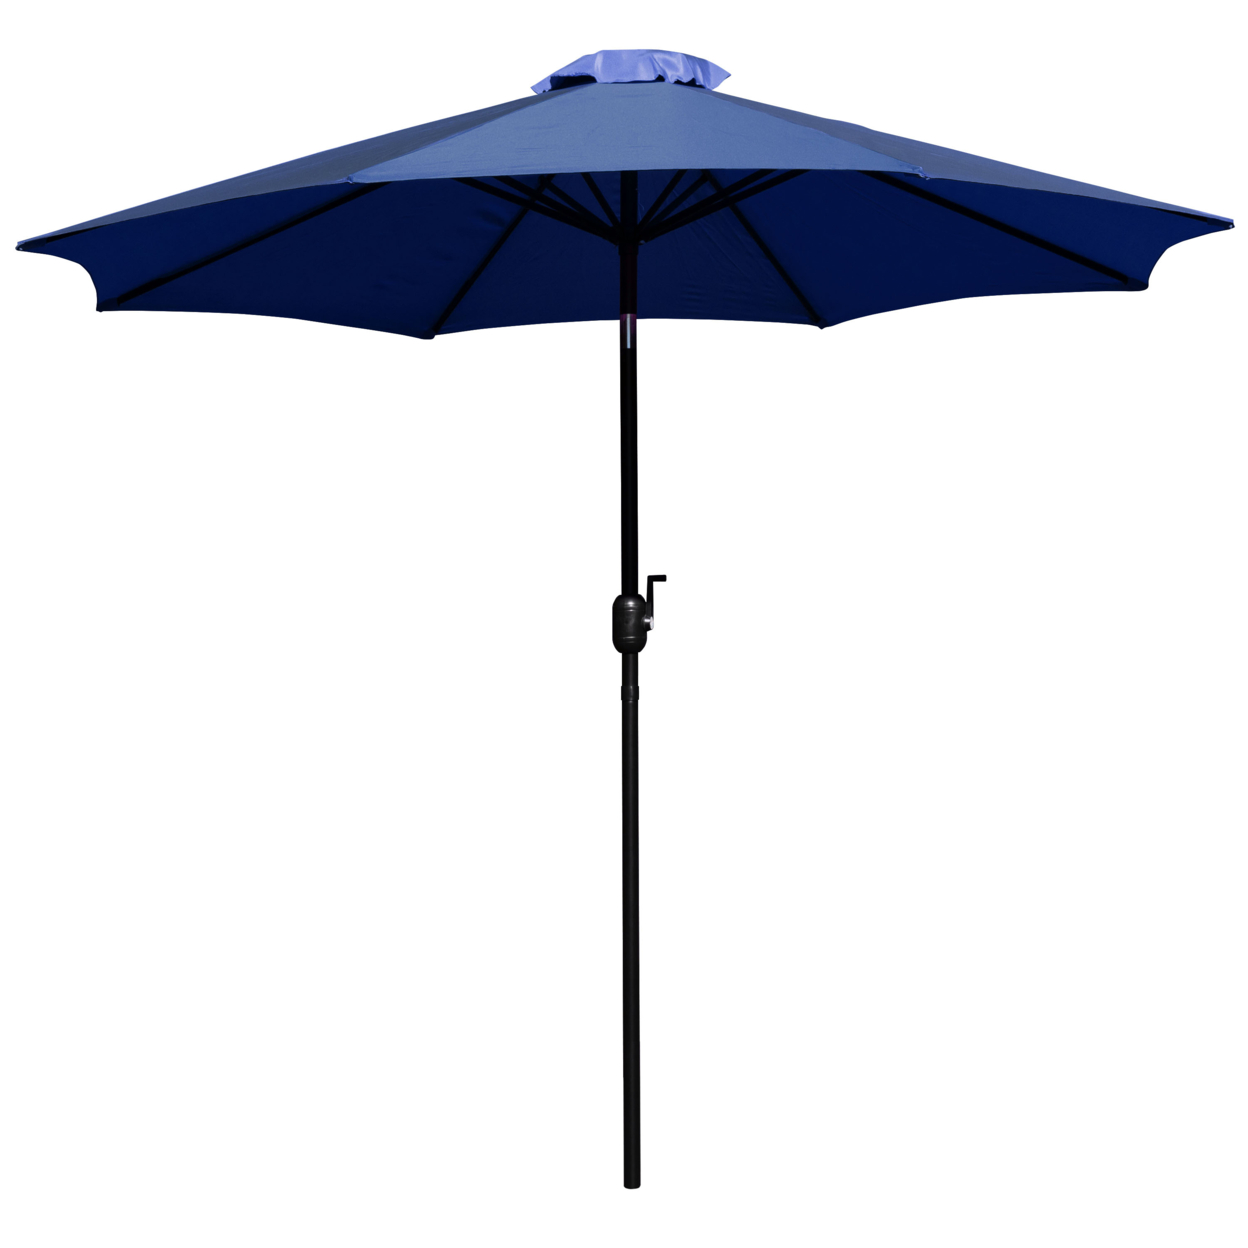 Navy 9 FT Round Umbrella With 1.5 Diameter Aluminum Pole With Crank And Tilt Function